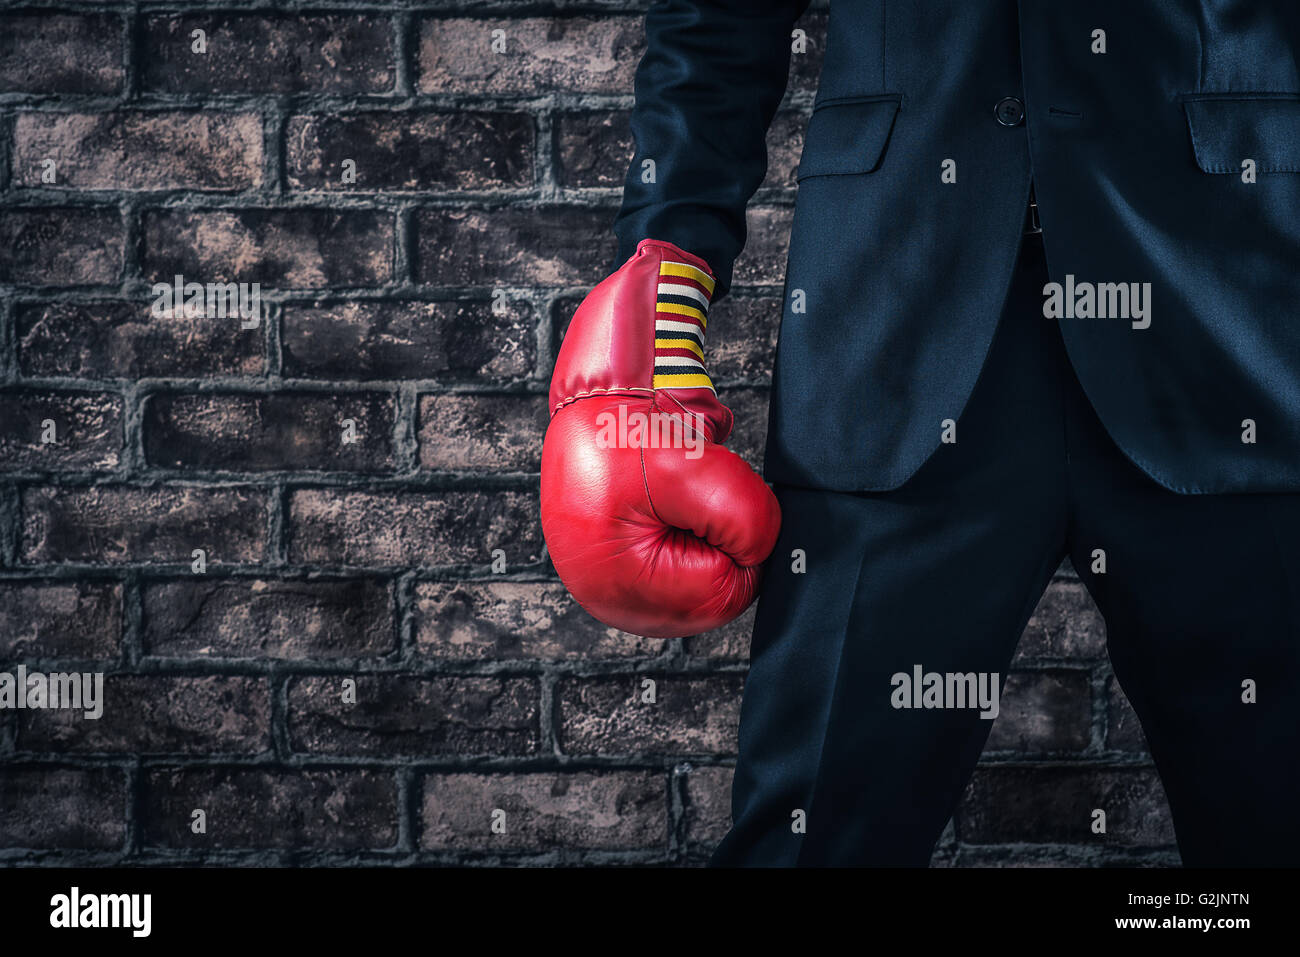 Boxing gloves,Man wearing a suit Stock Photo